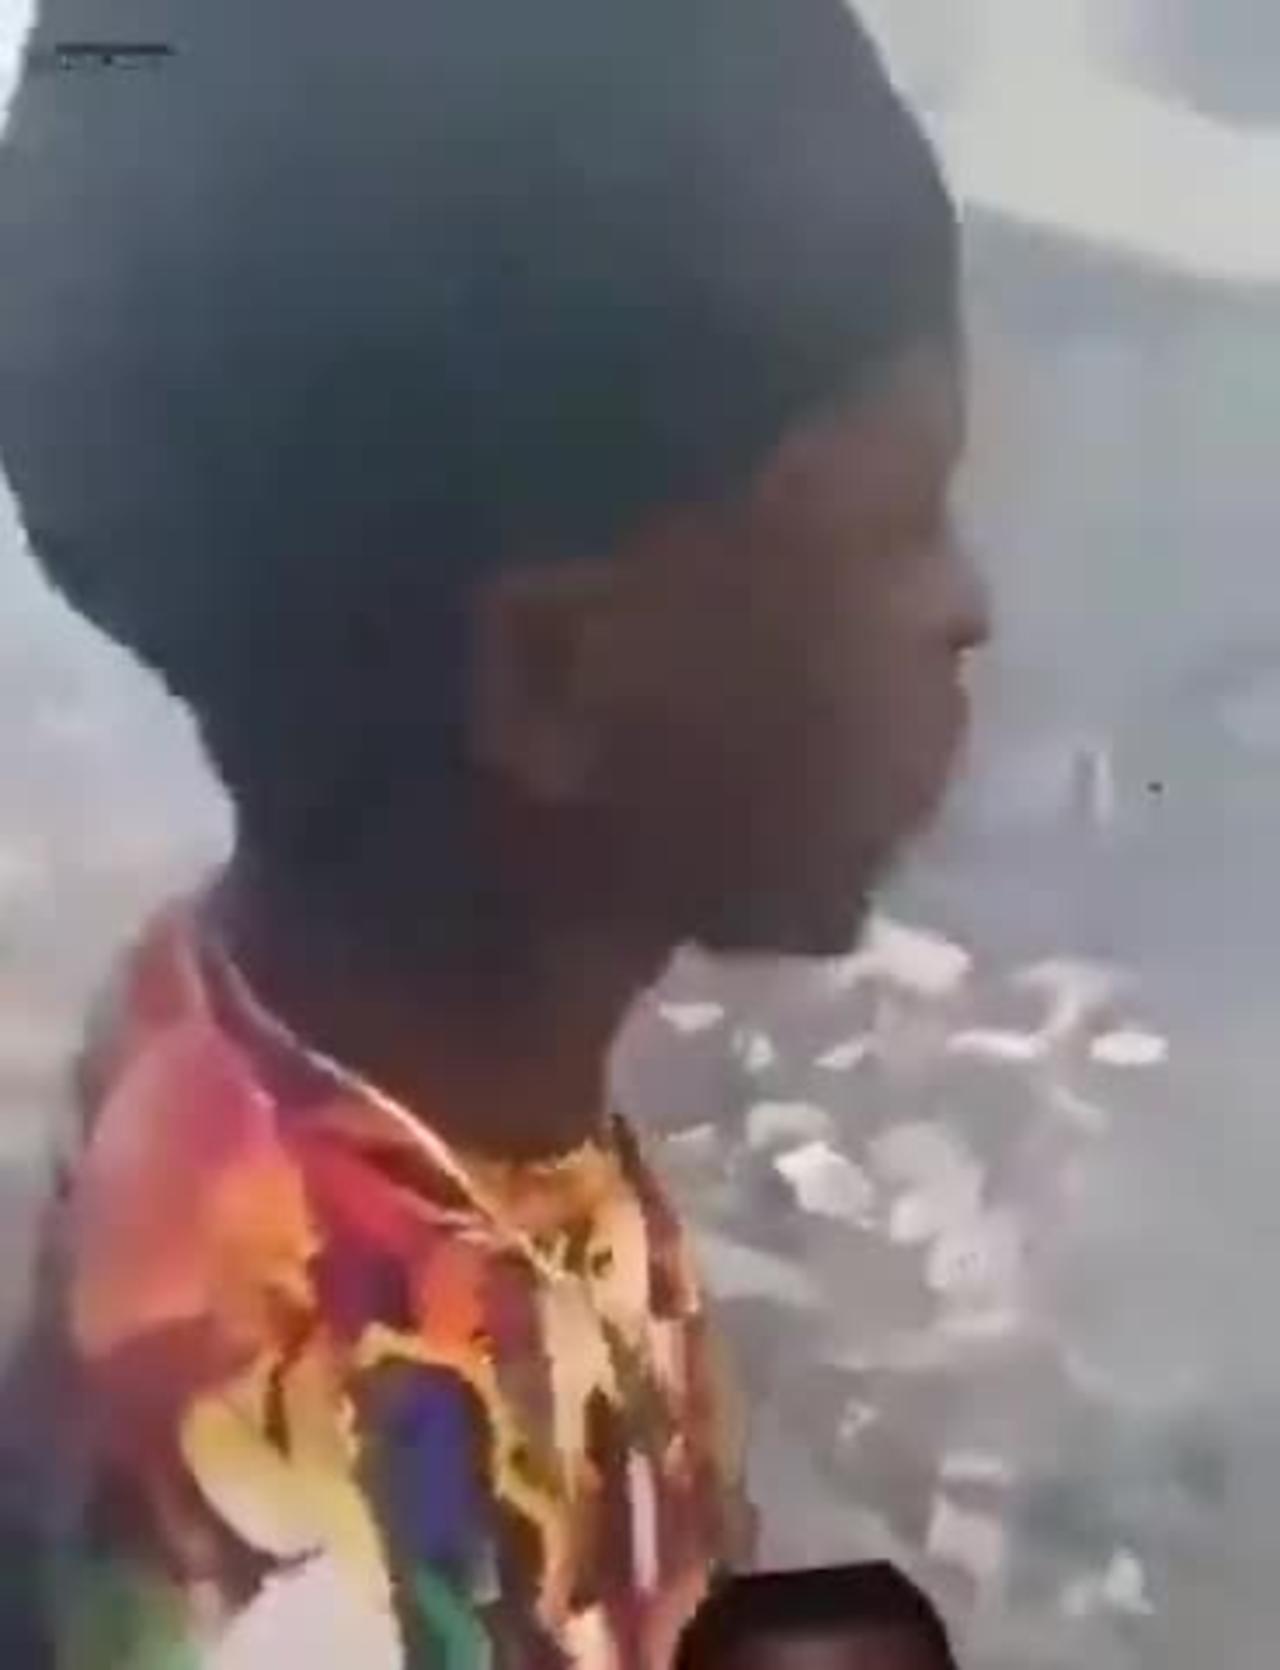 🚨 Members of Haitian 'Cannibal' Gang Eats Body Parts After Burning Someone (GRAPHIC)